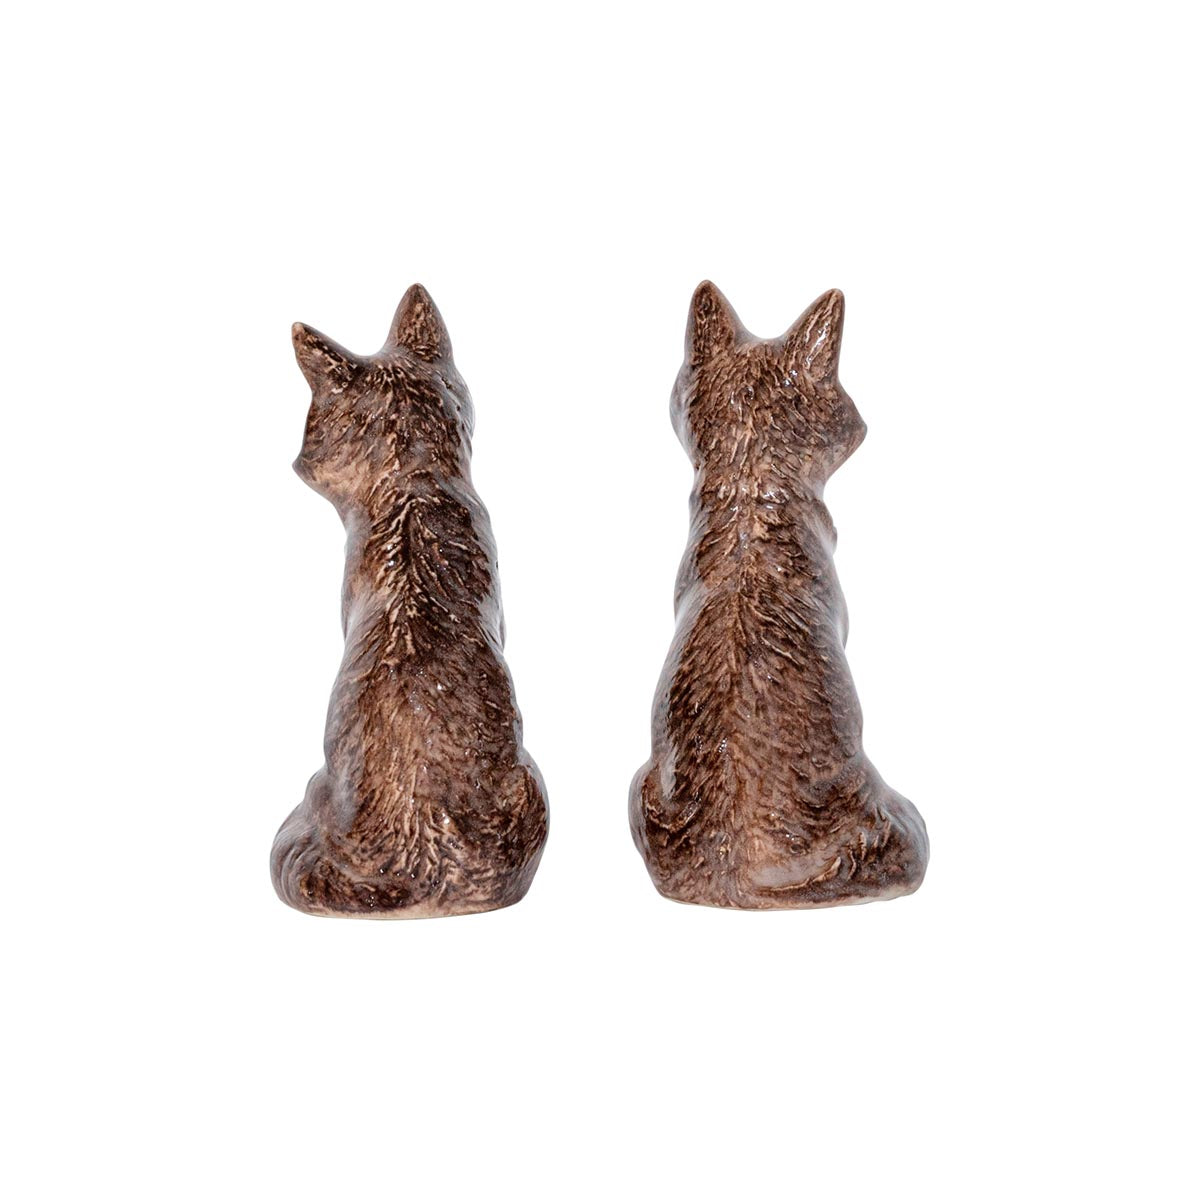 Clever Creature Louis & Marie Salt & Pepper Shakers